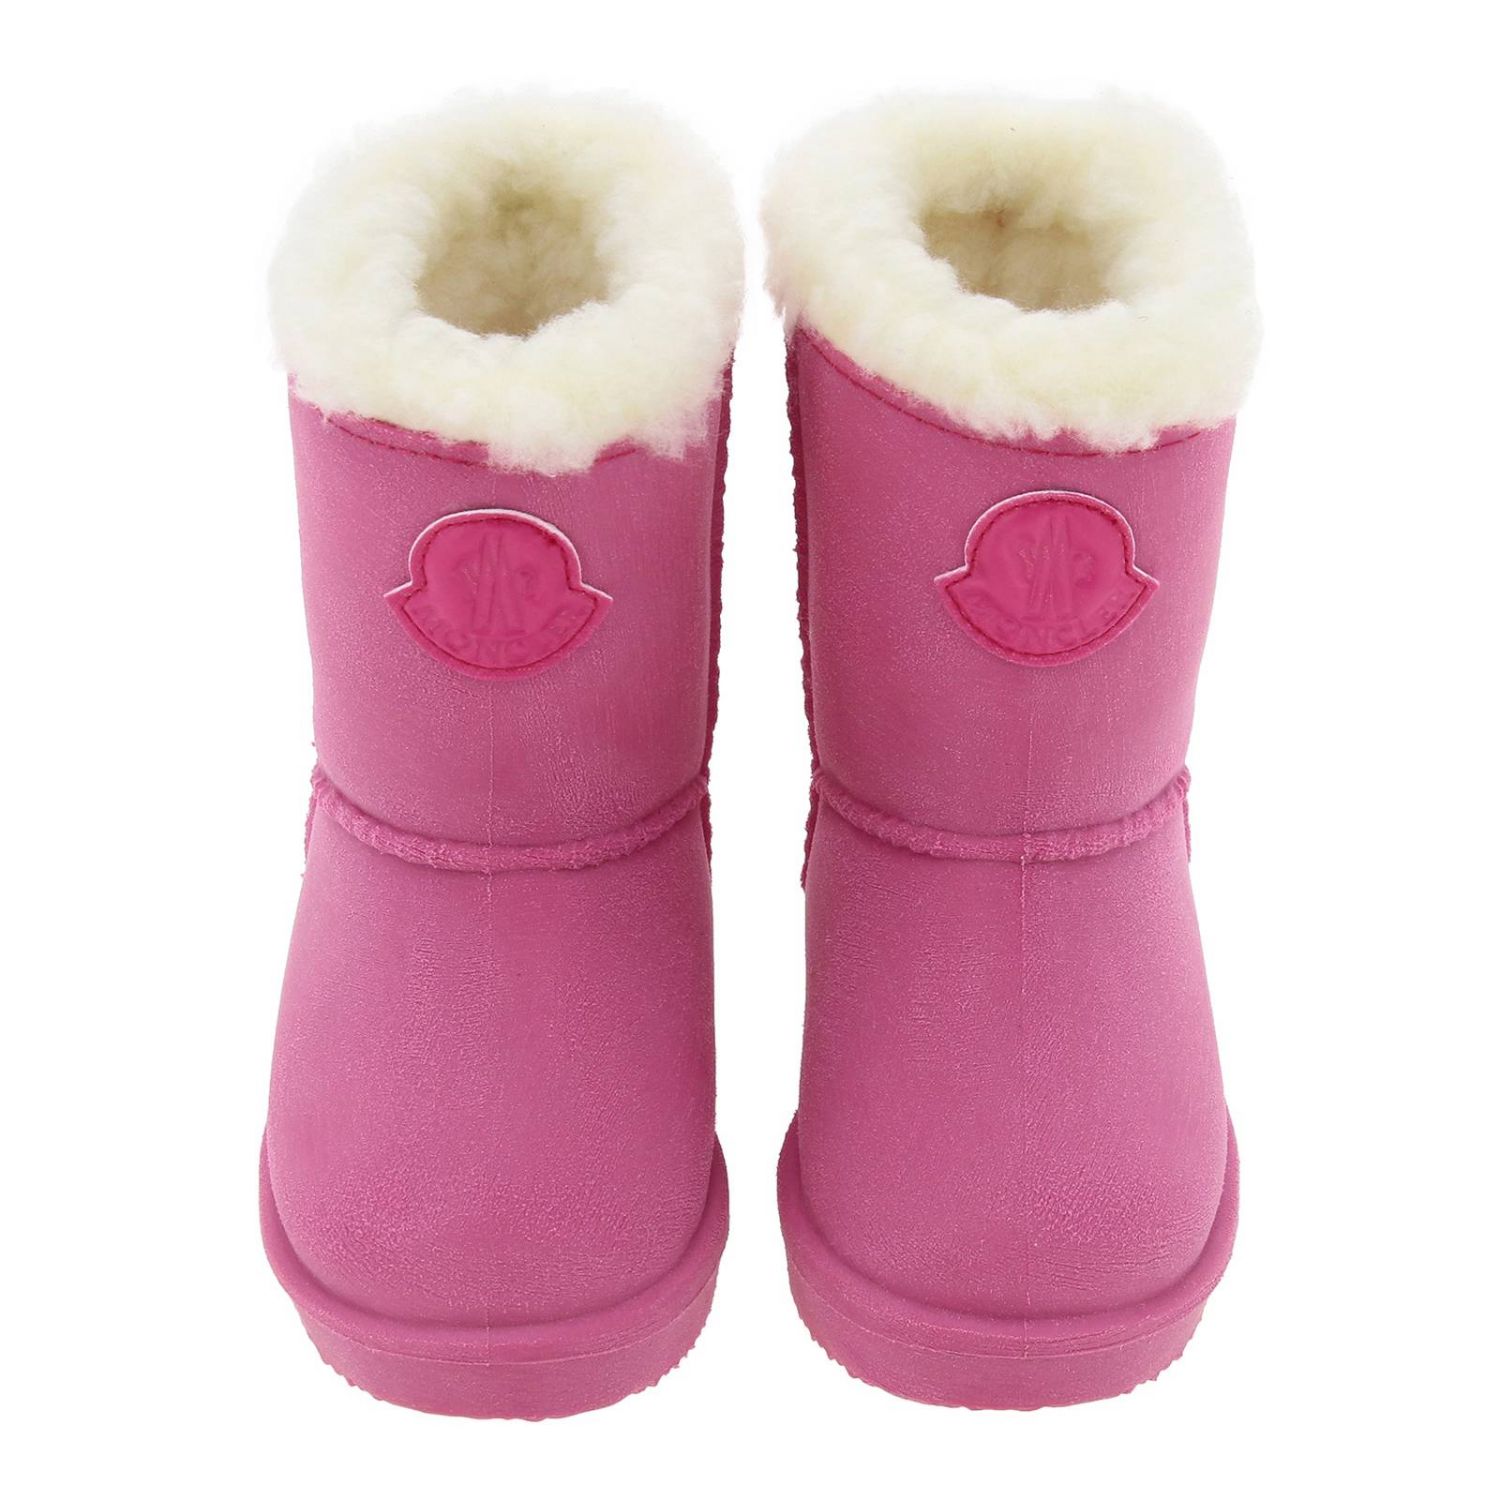 Chaussures Moncler: Chaussures Moncler fille rose 3